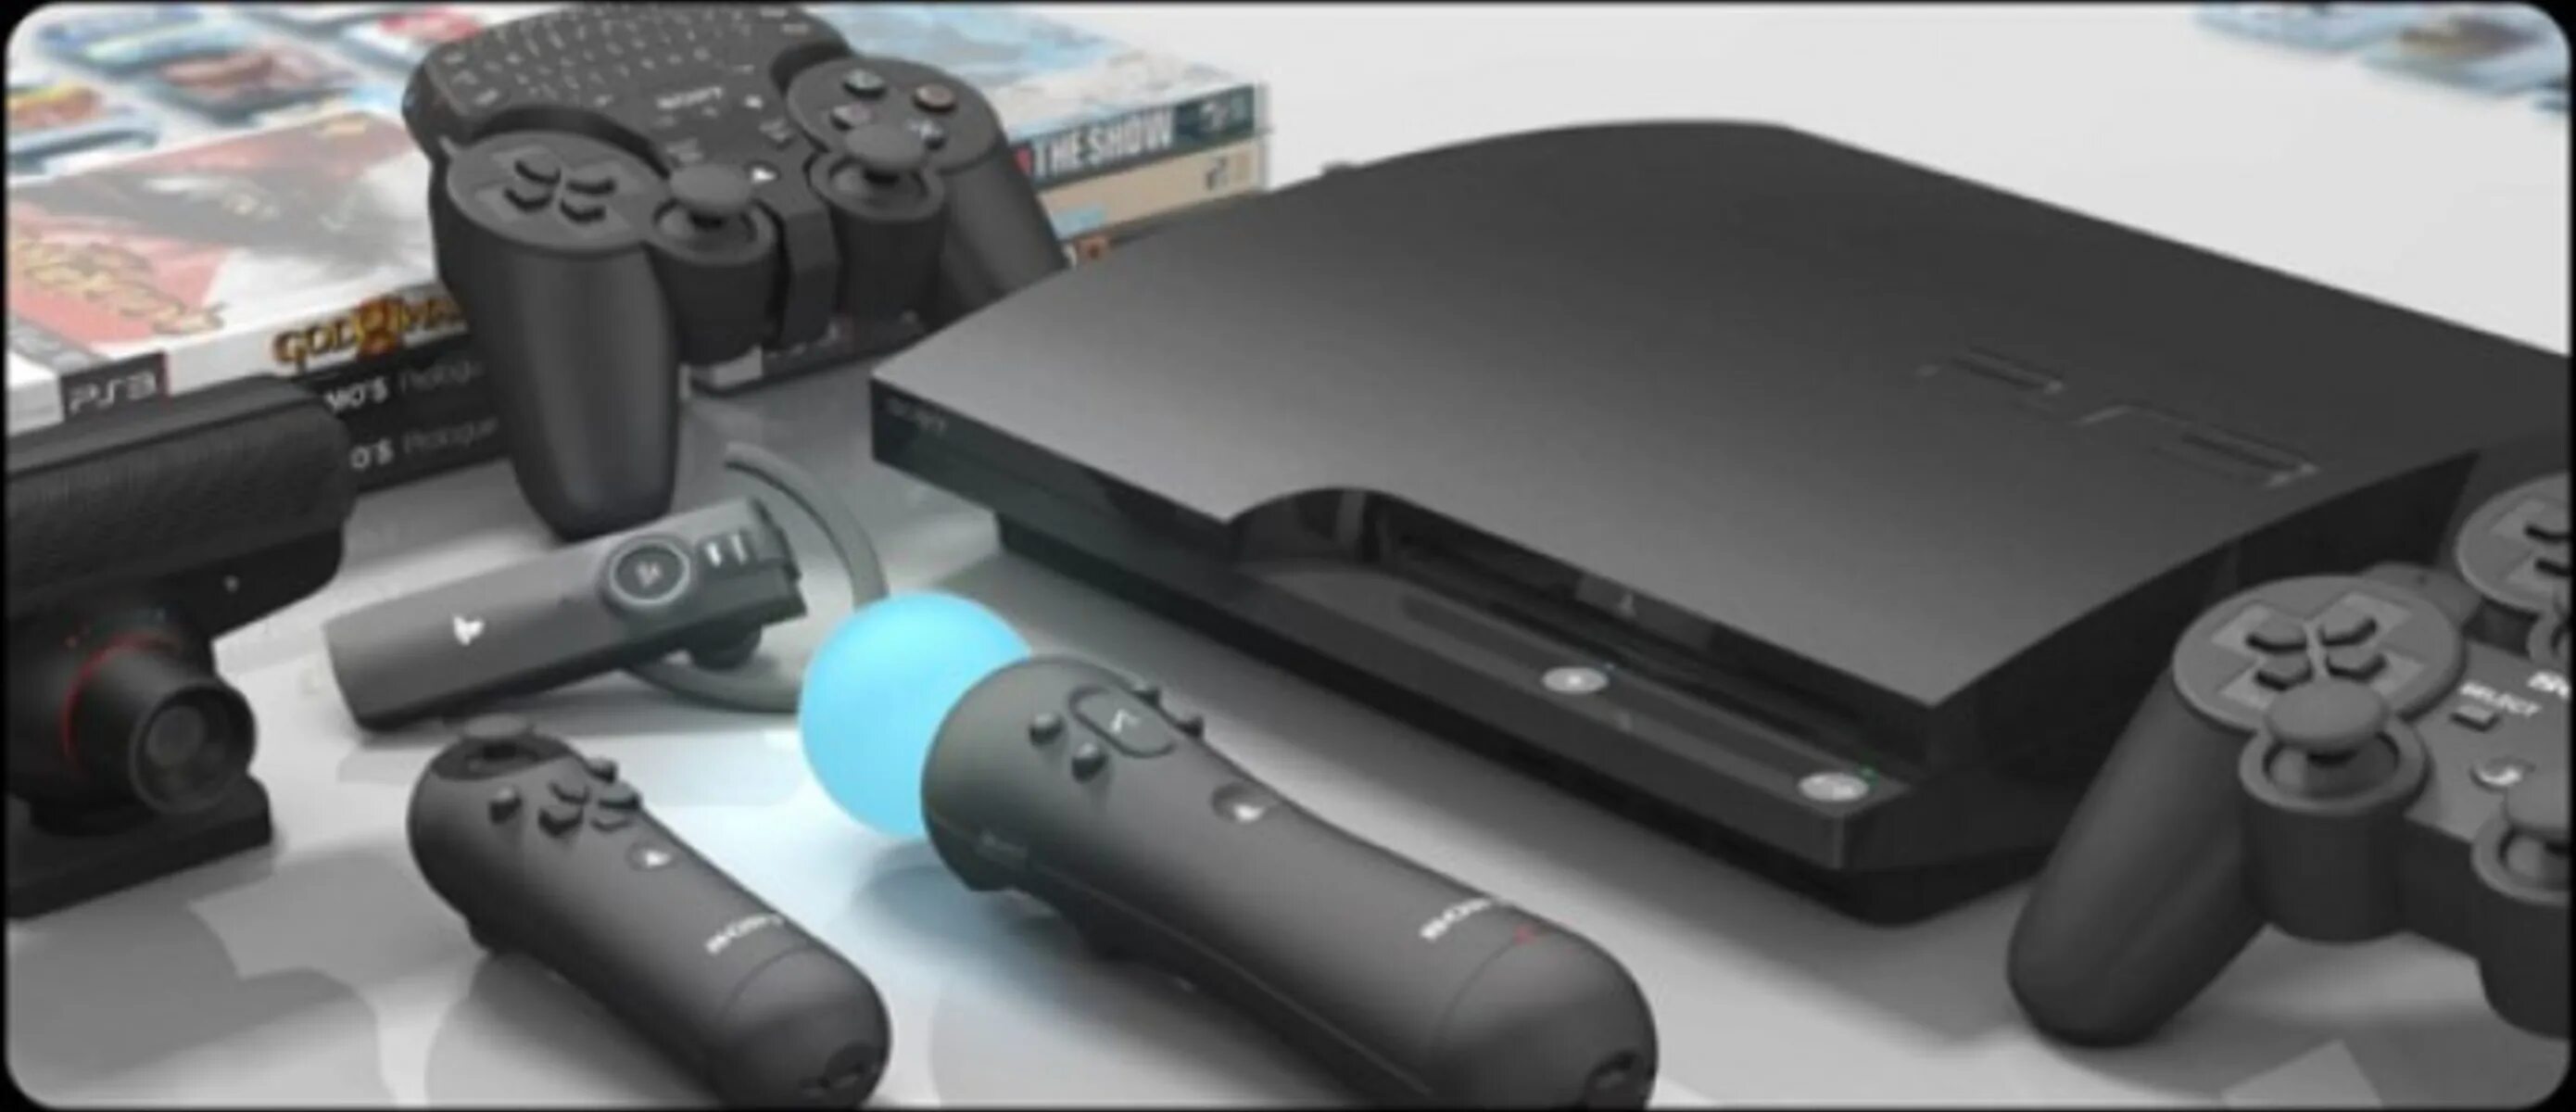 PLAYSTATION move ps5 Sony. ПС мув для пс4. Сони ps3 инсайдеры. PS move ps3 ps4. Sony playstation ремонтundefined